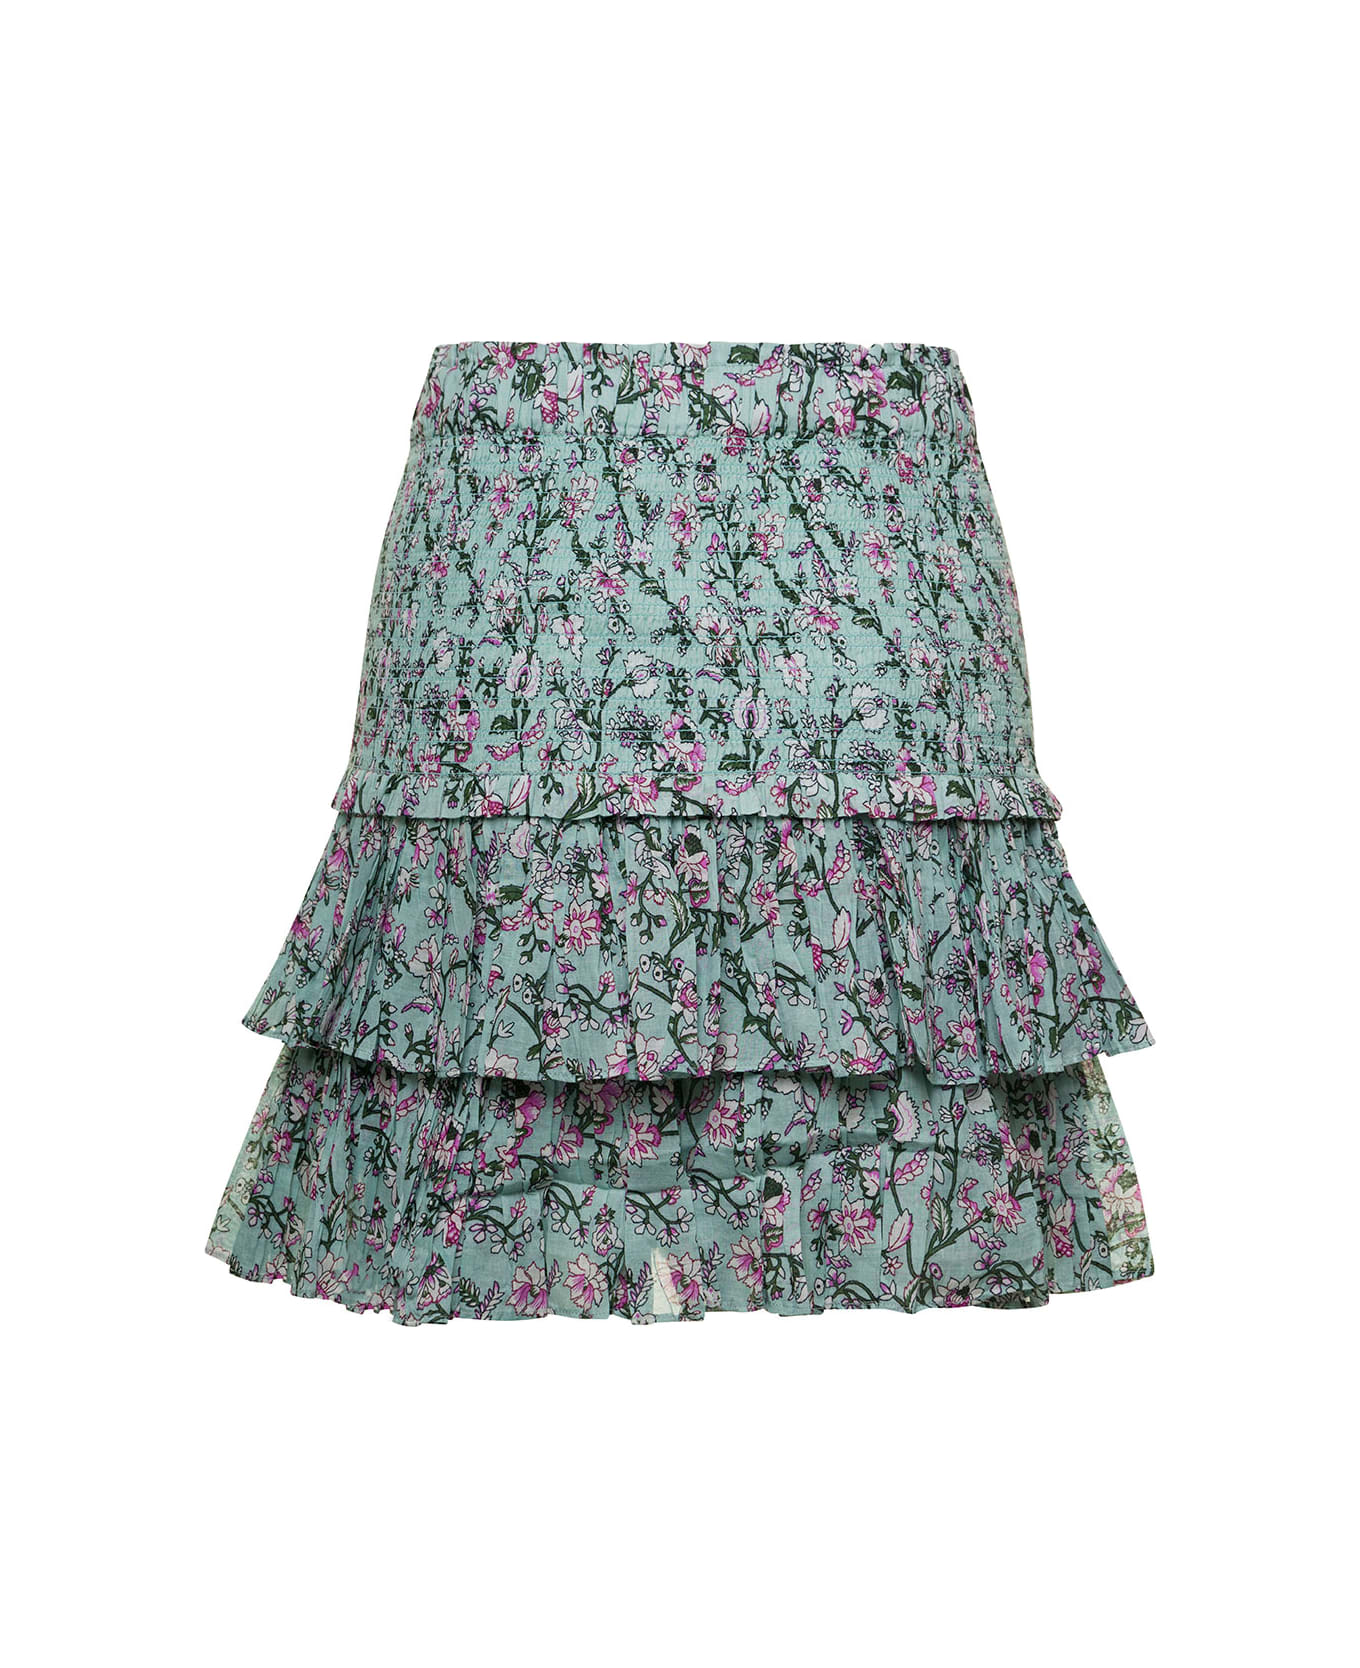 Isabel Marant Étoile Light Blue Floral Print Tiered Skirt In Cotton Woman - Blu